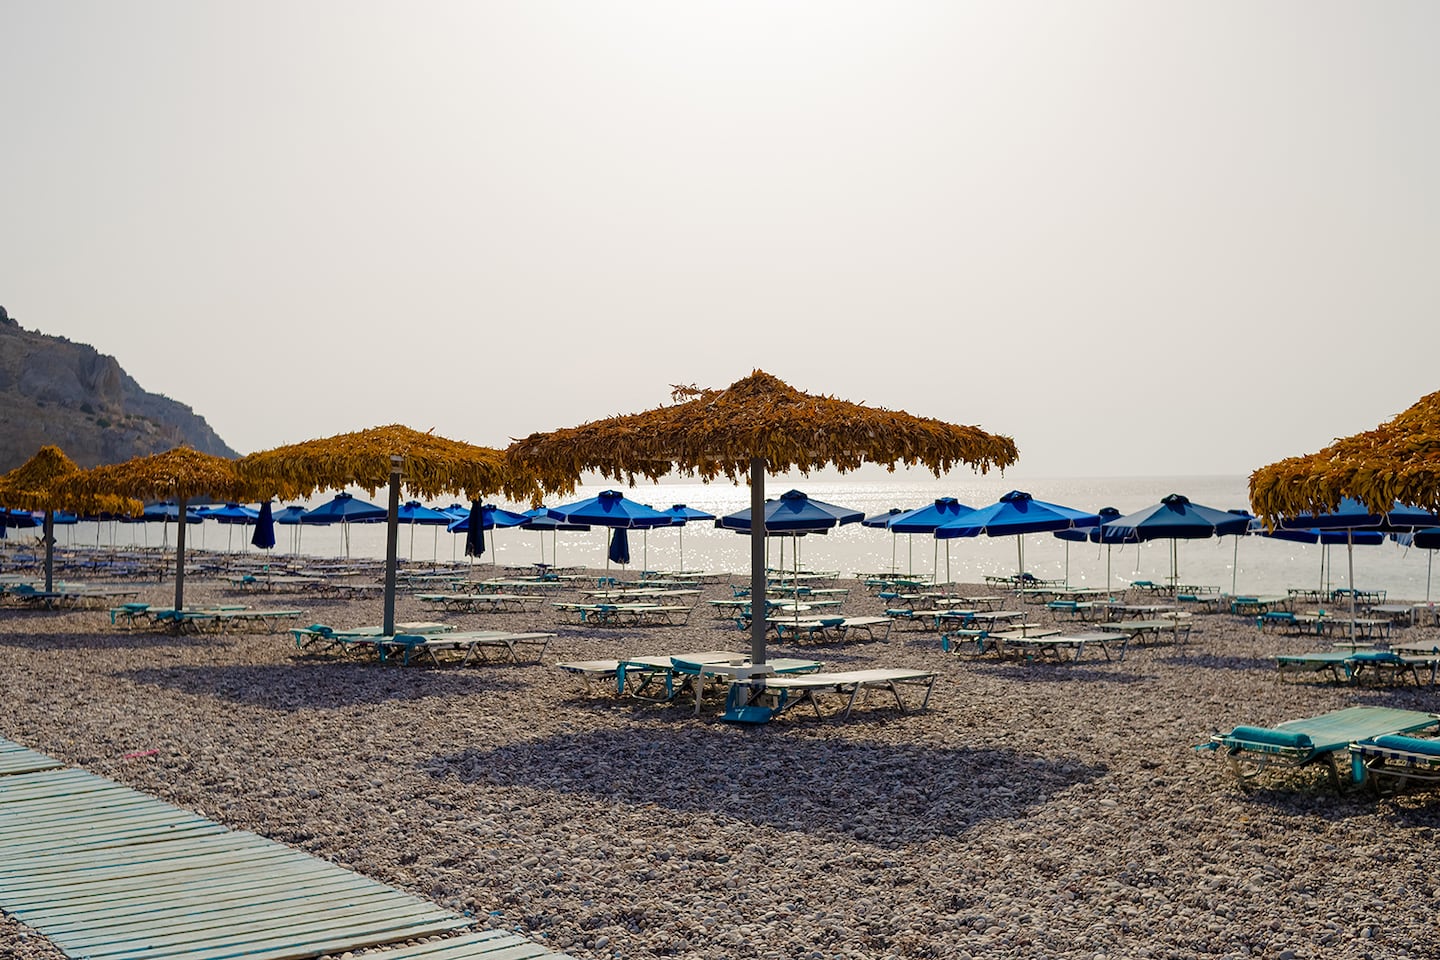 Empty beach with umbrellas and sunbeds.